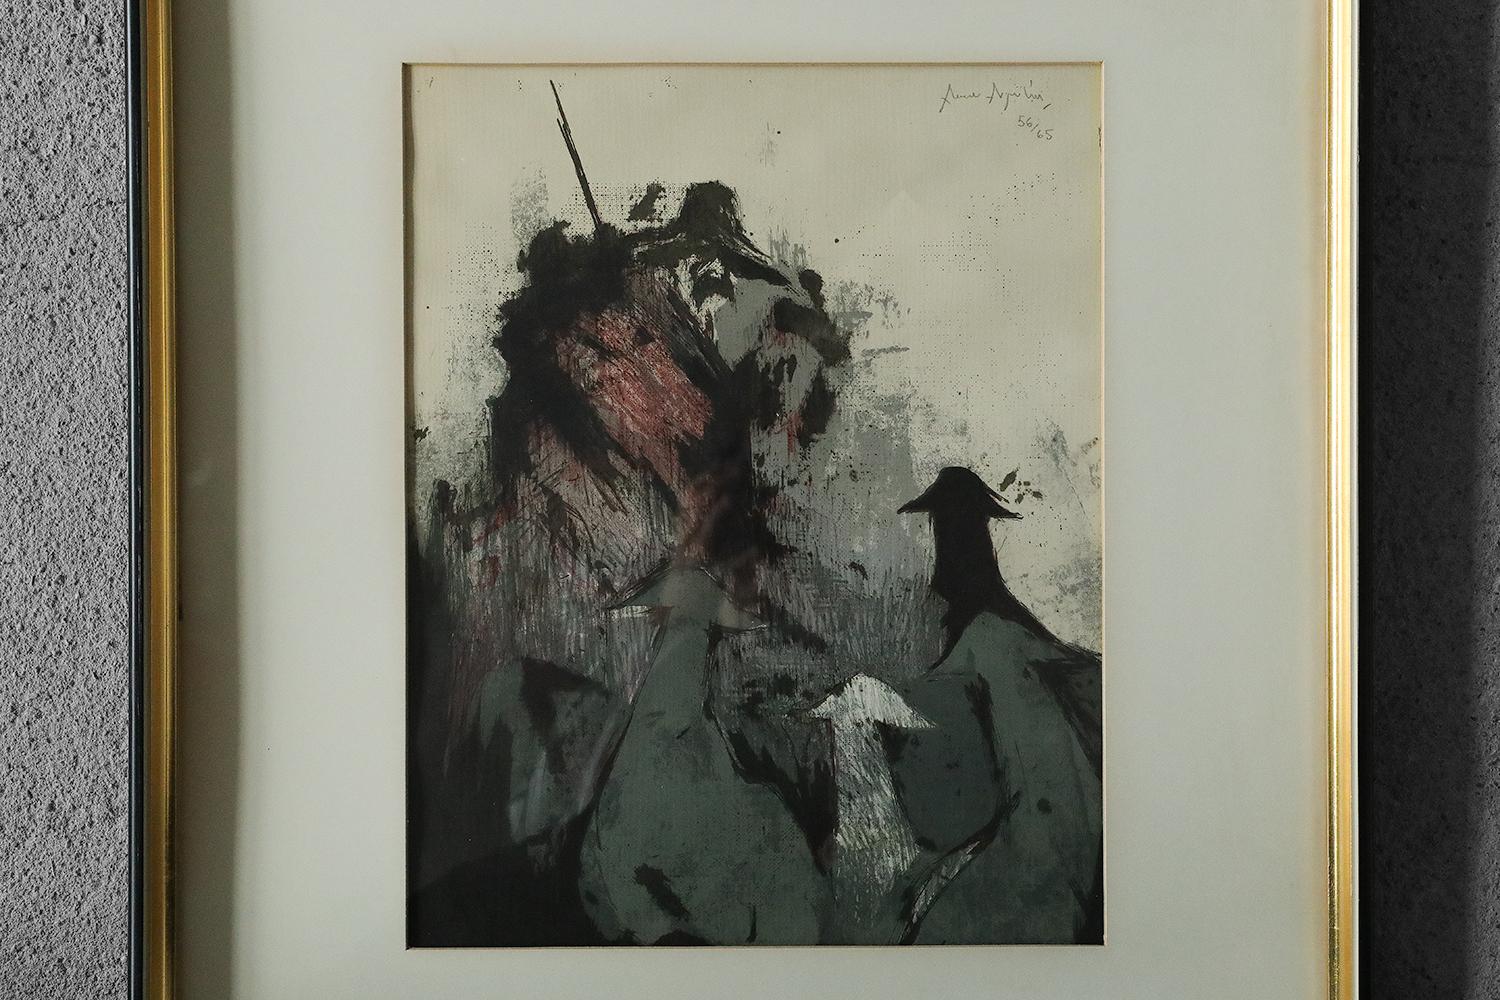 Author unknown, Composition
Color lithograph
Number 56/65
The work is signed by the artist and individually numbered (pencil)
Work dimensions 67/52
The work is framed

Work in original vintage condition. It has a signature of the artist.